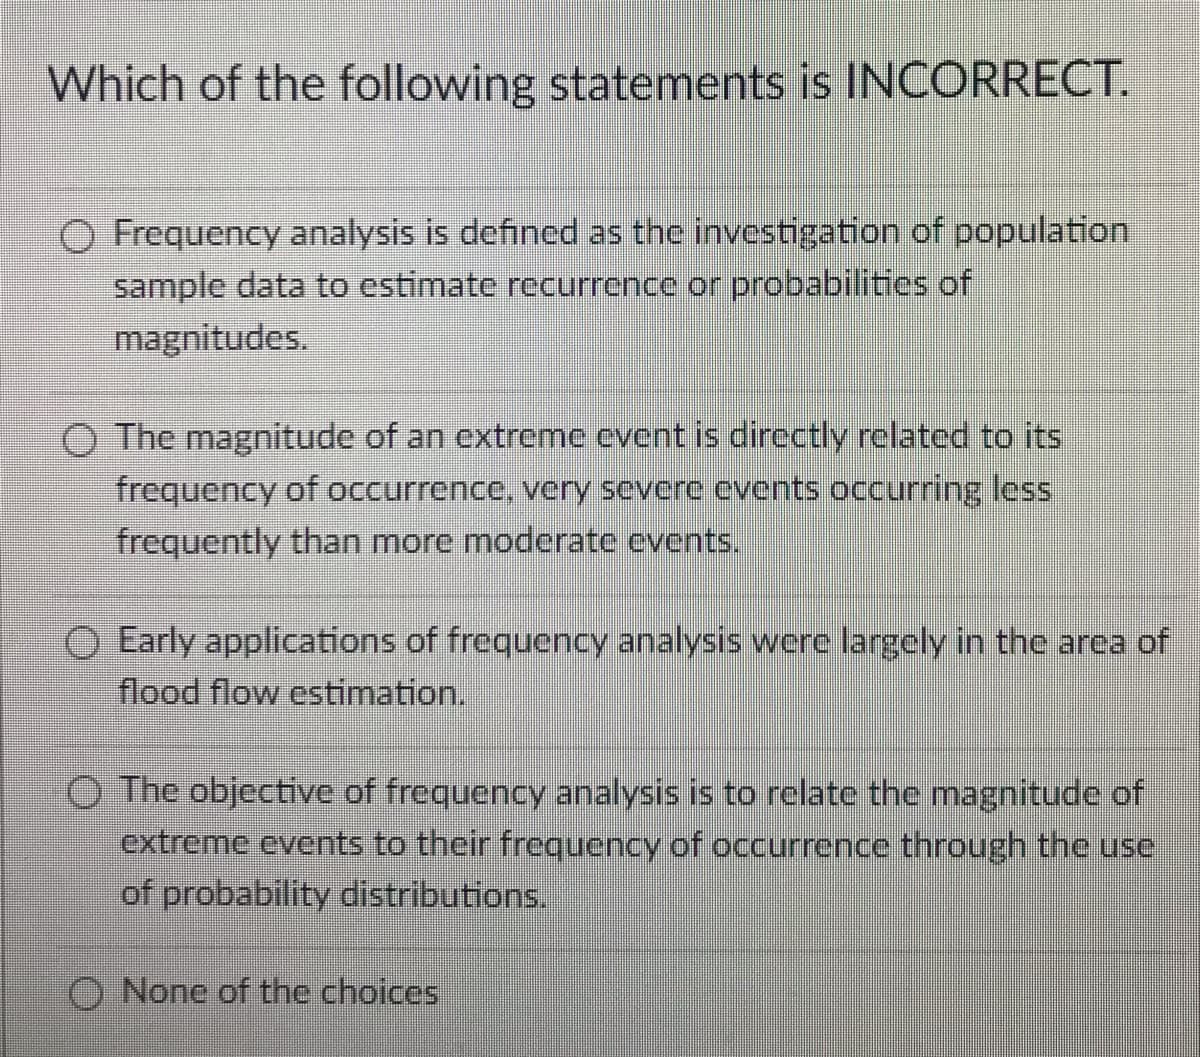 Which of the following statements is INCORRECT.
O Frequency analysis is defined as the investigation of population
sample data to estimate recurrence or probabilities of
magnitudes.
O The magnitude of an extreme event is directly related to its
frequency of occurrence, very severe events occurring less
frequently than more moderate events.
O Early applications of frequency analysis were largely in the area of
flood flow estimation.
O The objective of frequency analysis is to relate the magnitude of
extreme events to their frequency of occurrence through the use
of probability distributions.
O None of the choices
